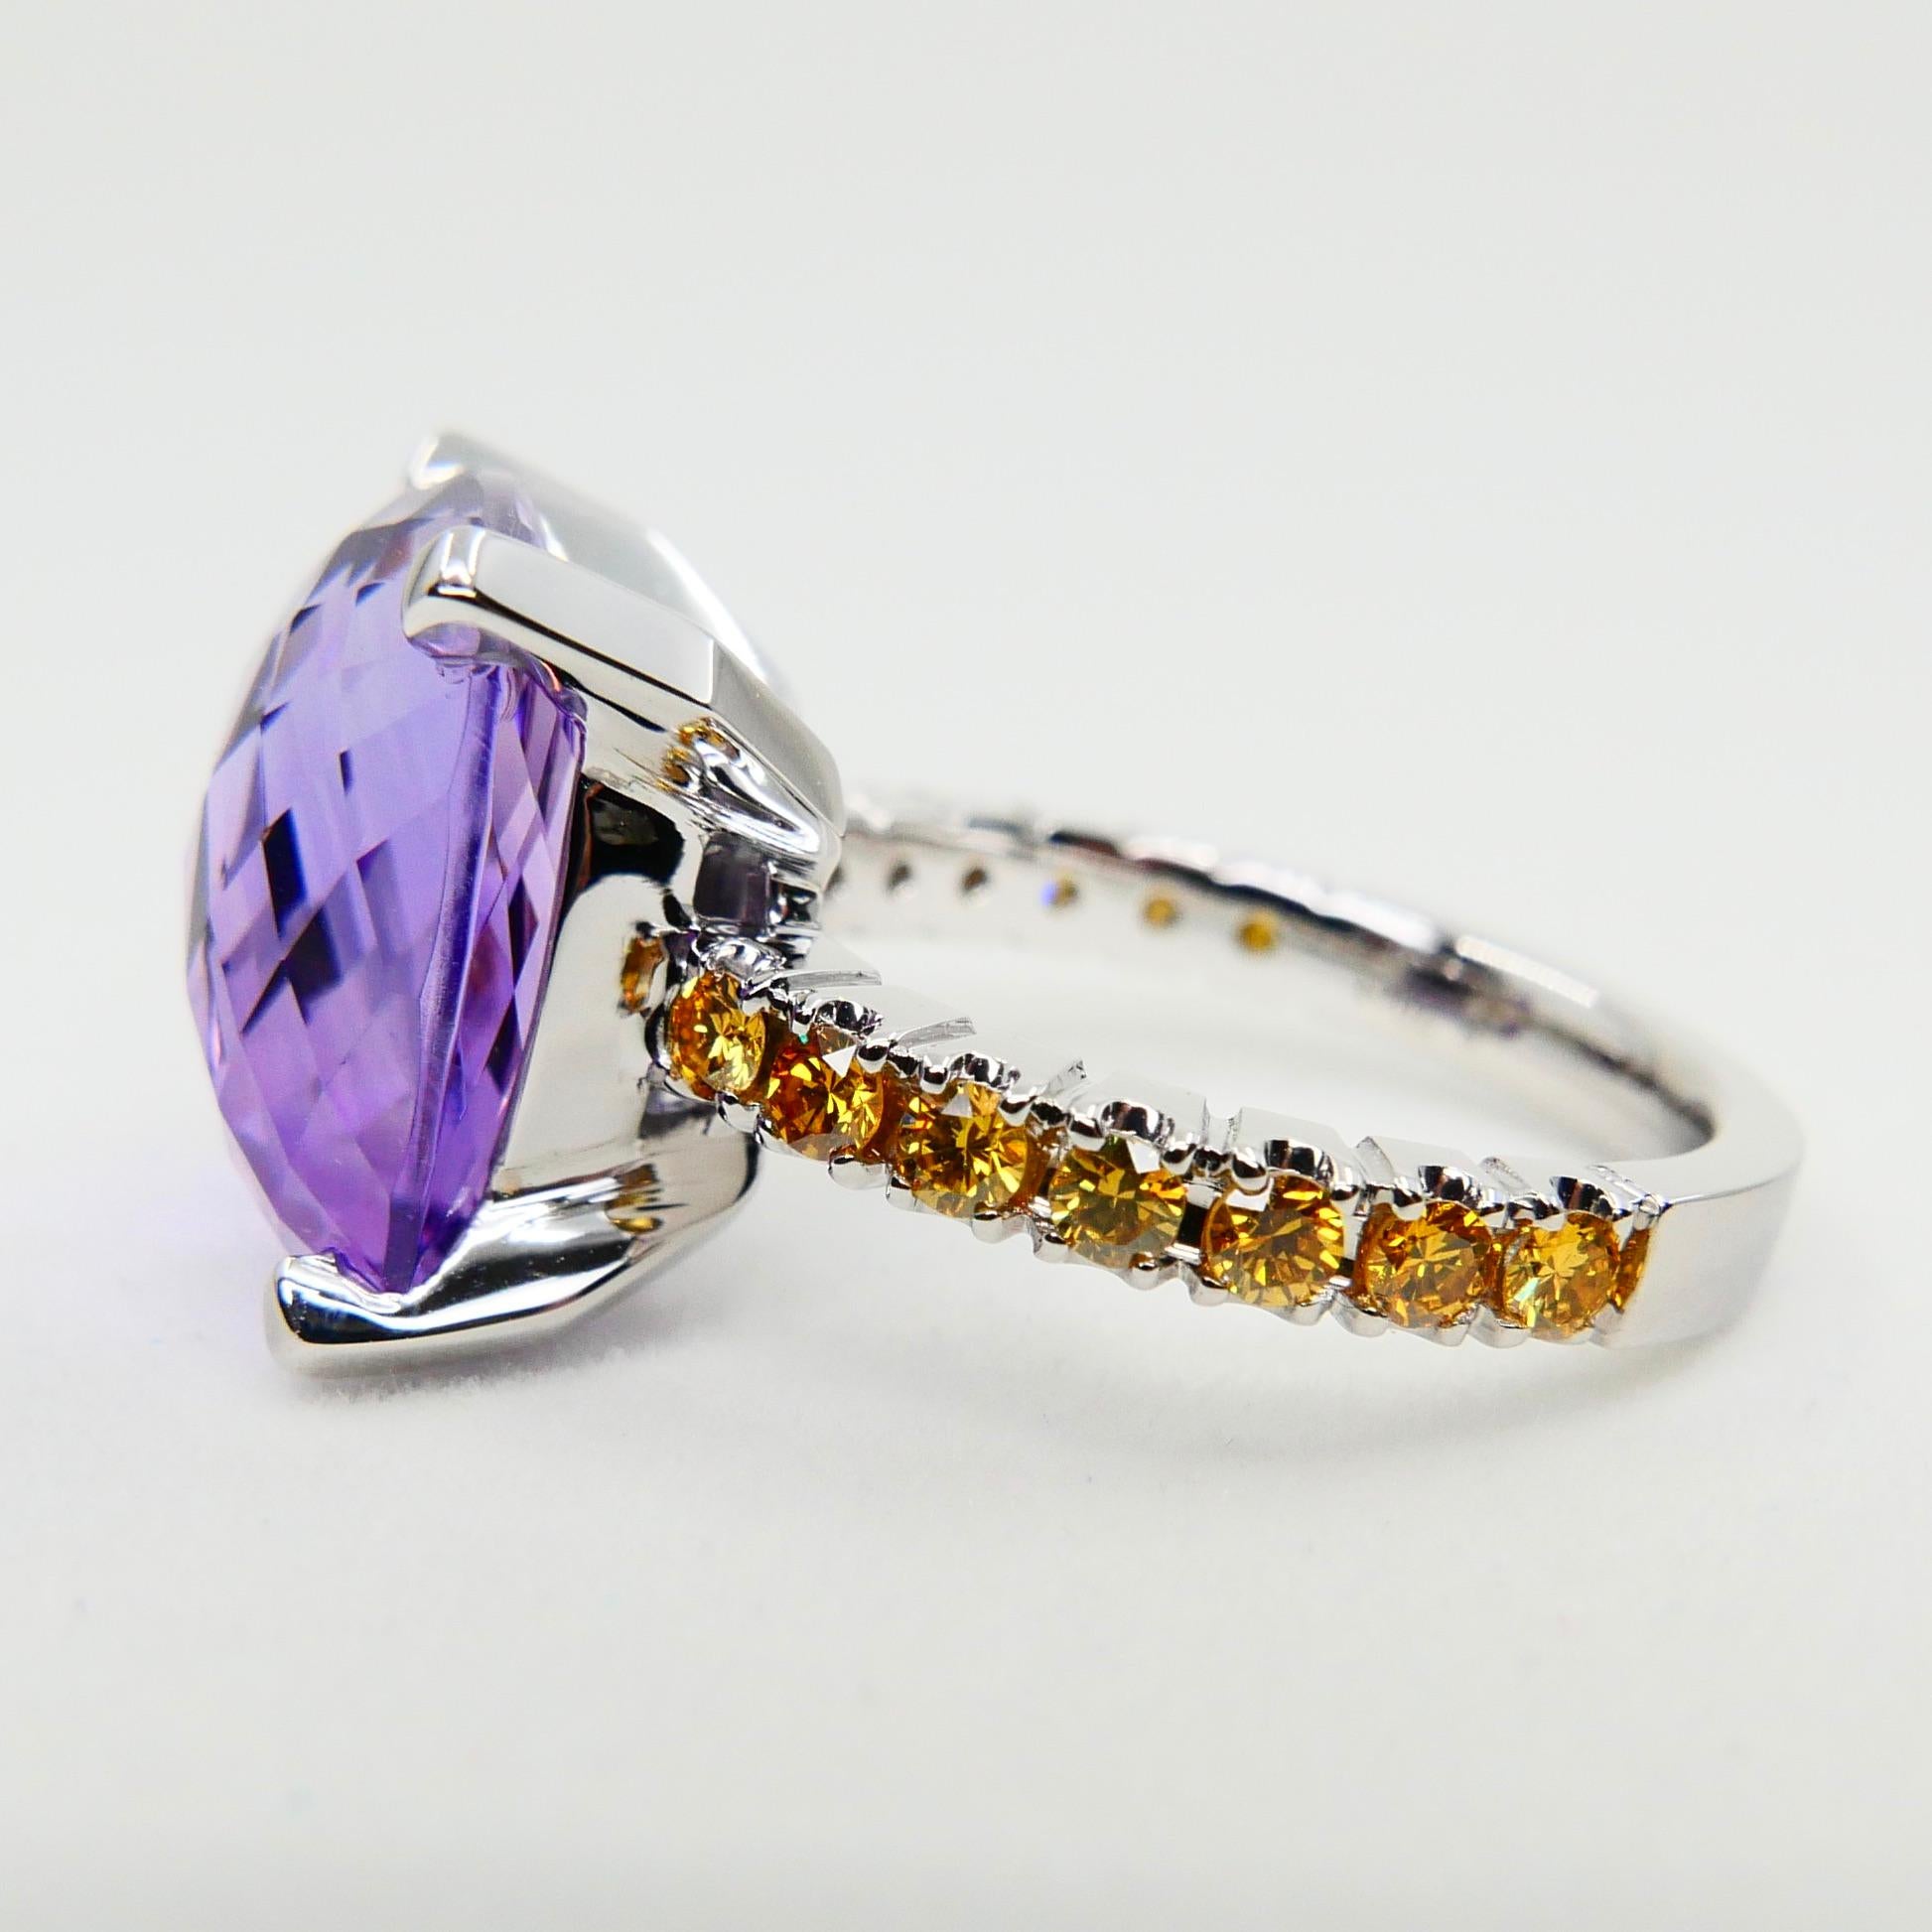 Women's 8.70 Carat Amethyst Cocktail Ring with Fancy Vivid Yellow Diamonds, Statement For Sale